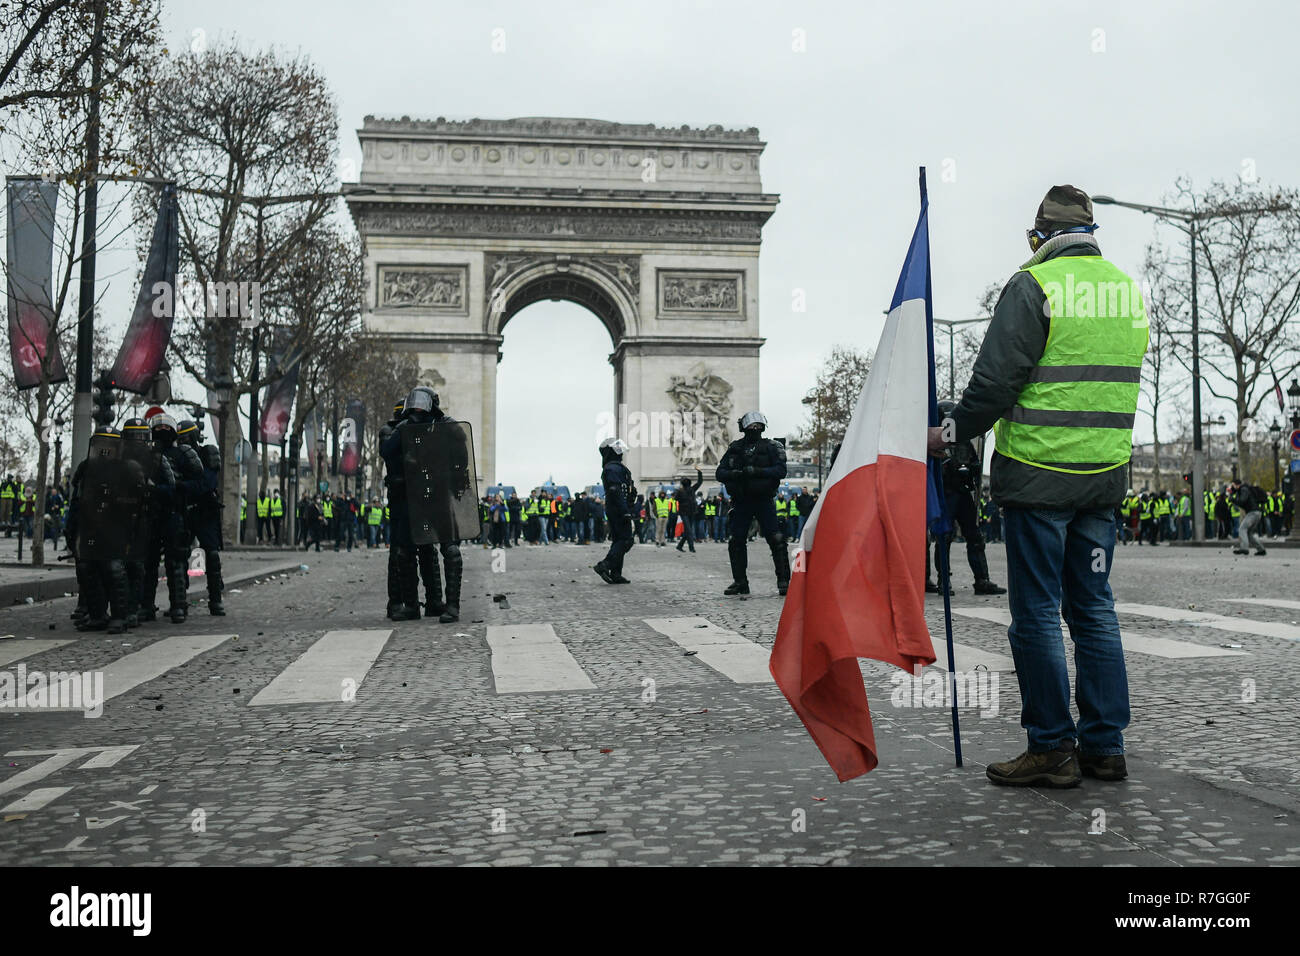 Paris, France - 8 December 2018: Yellow Vests (Gilets jaunes) protests against living costs and rising oil prices Stock Photo